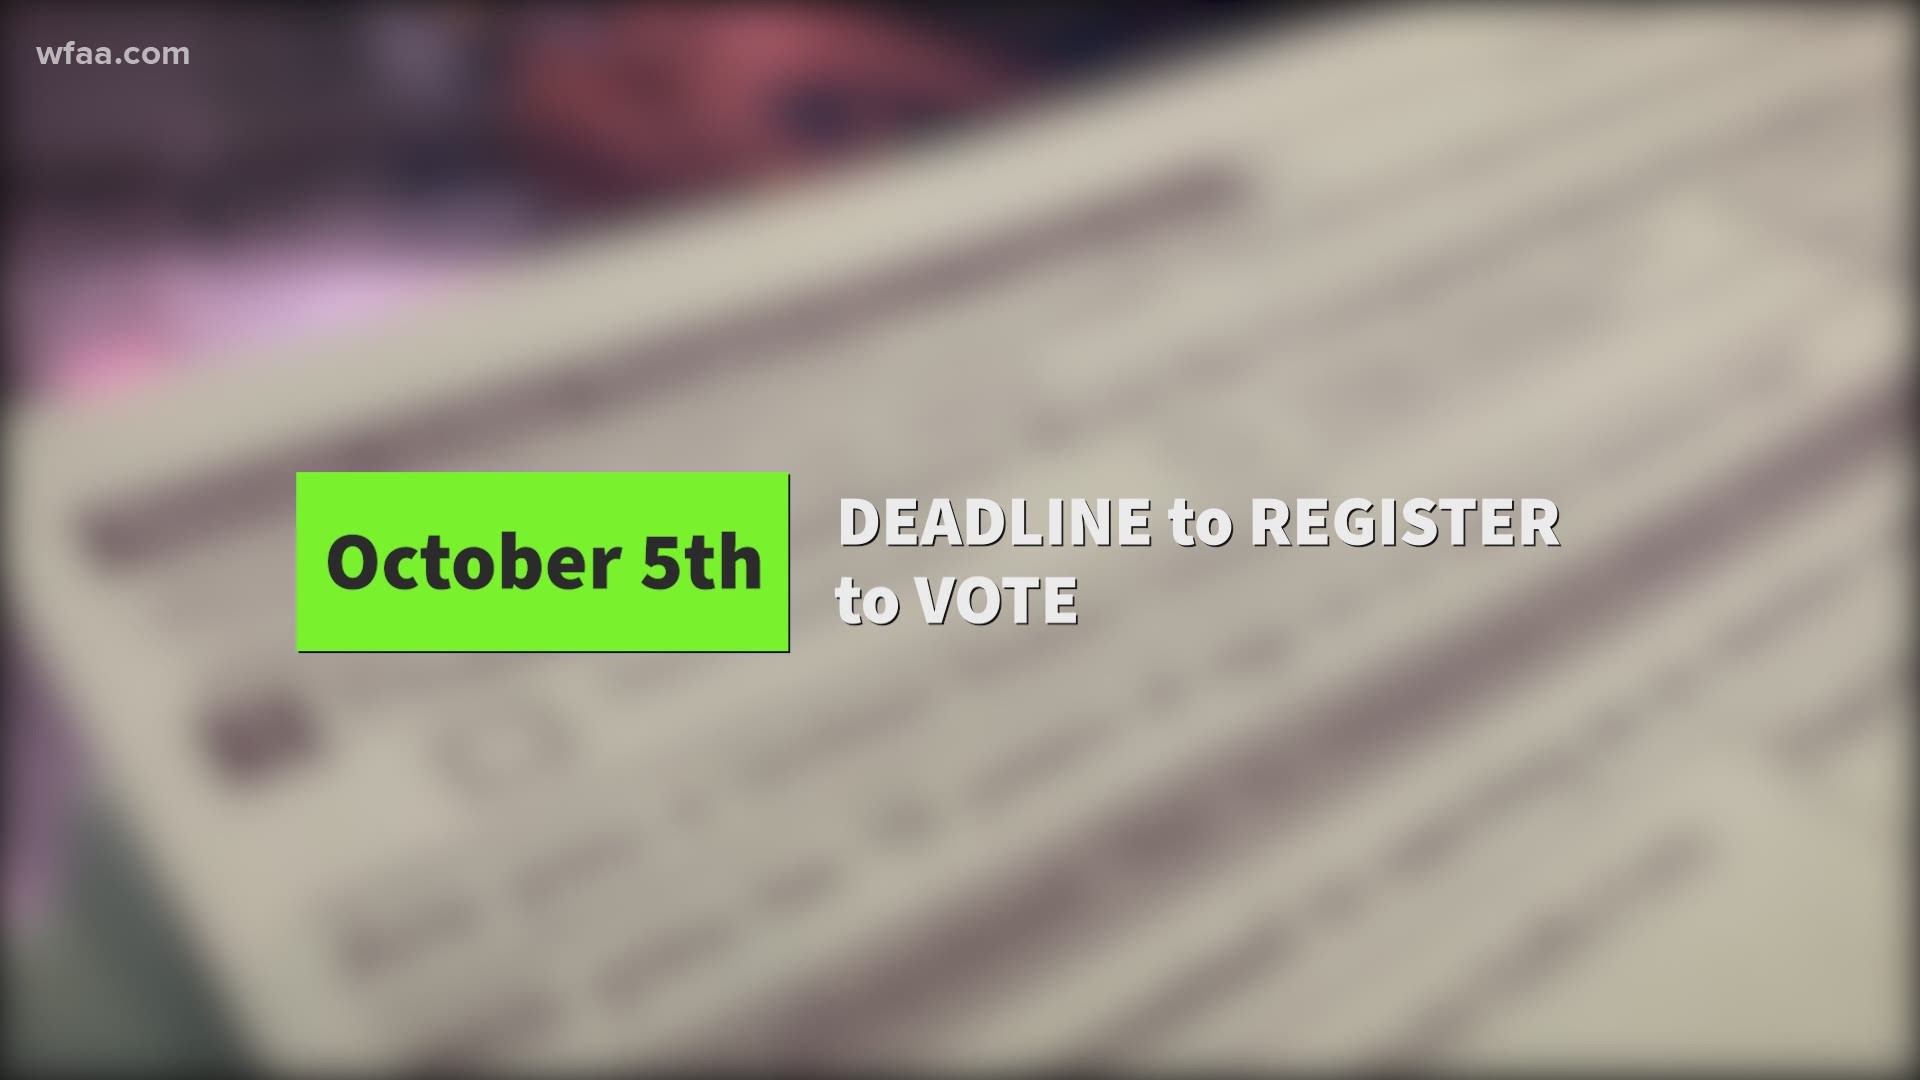 The deadline to register to vote is Oct. 5.